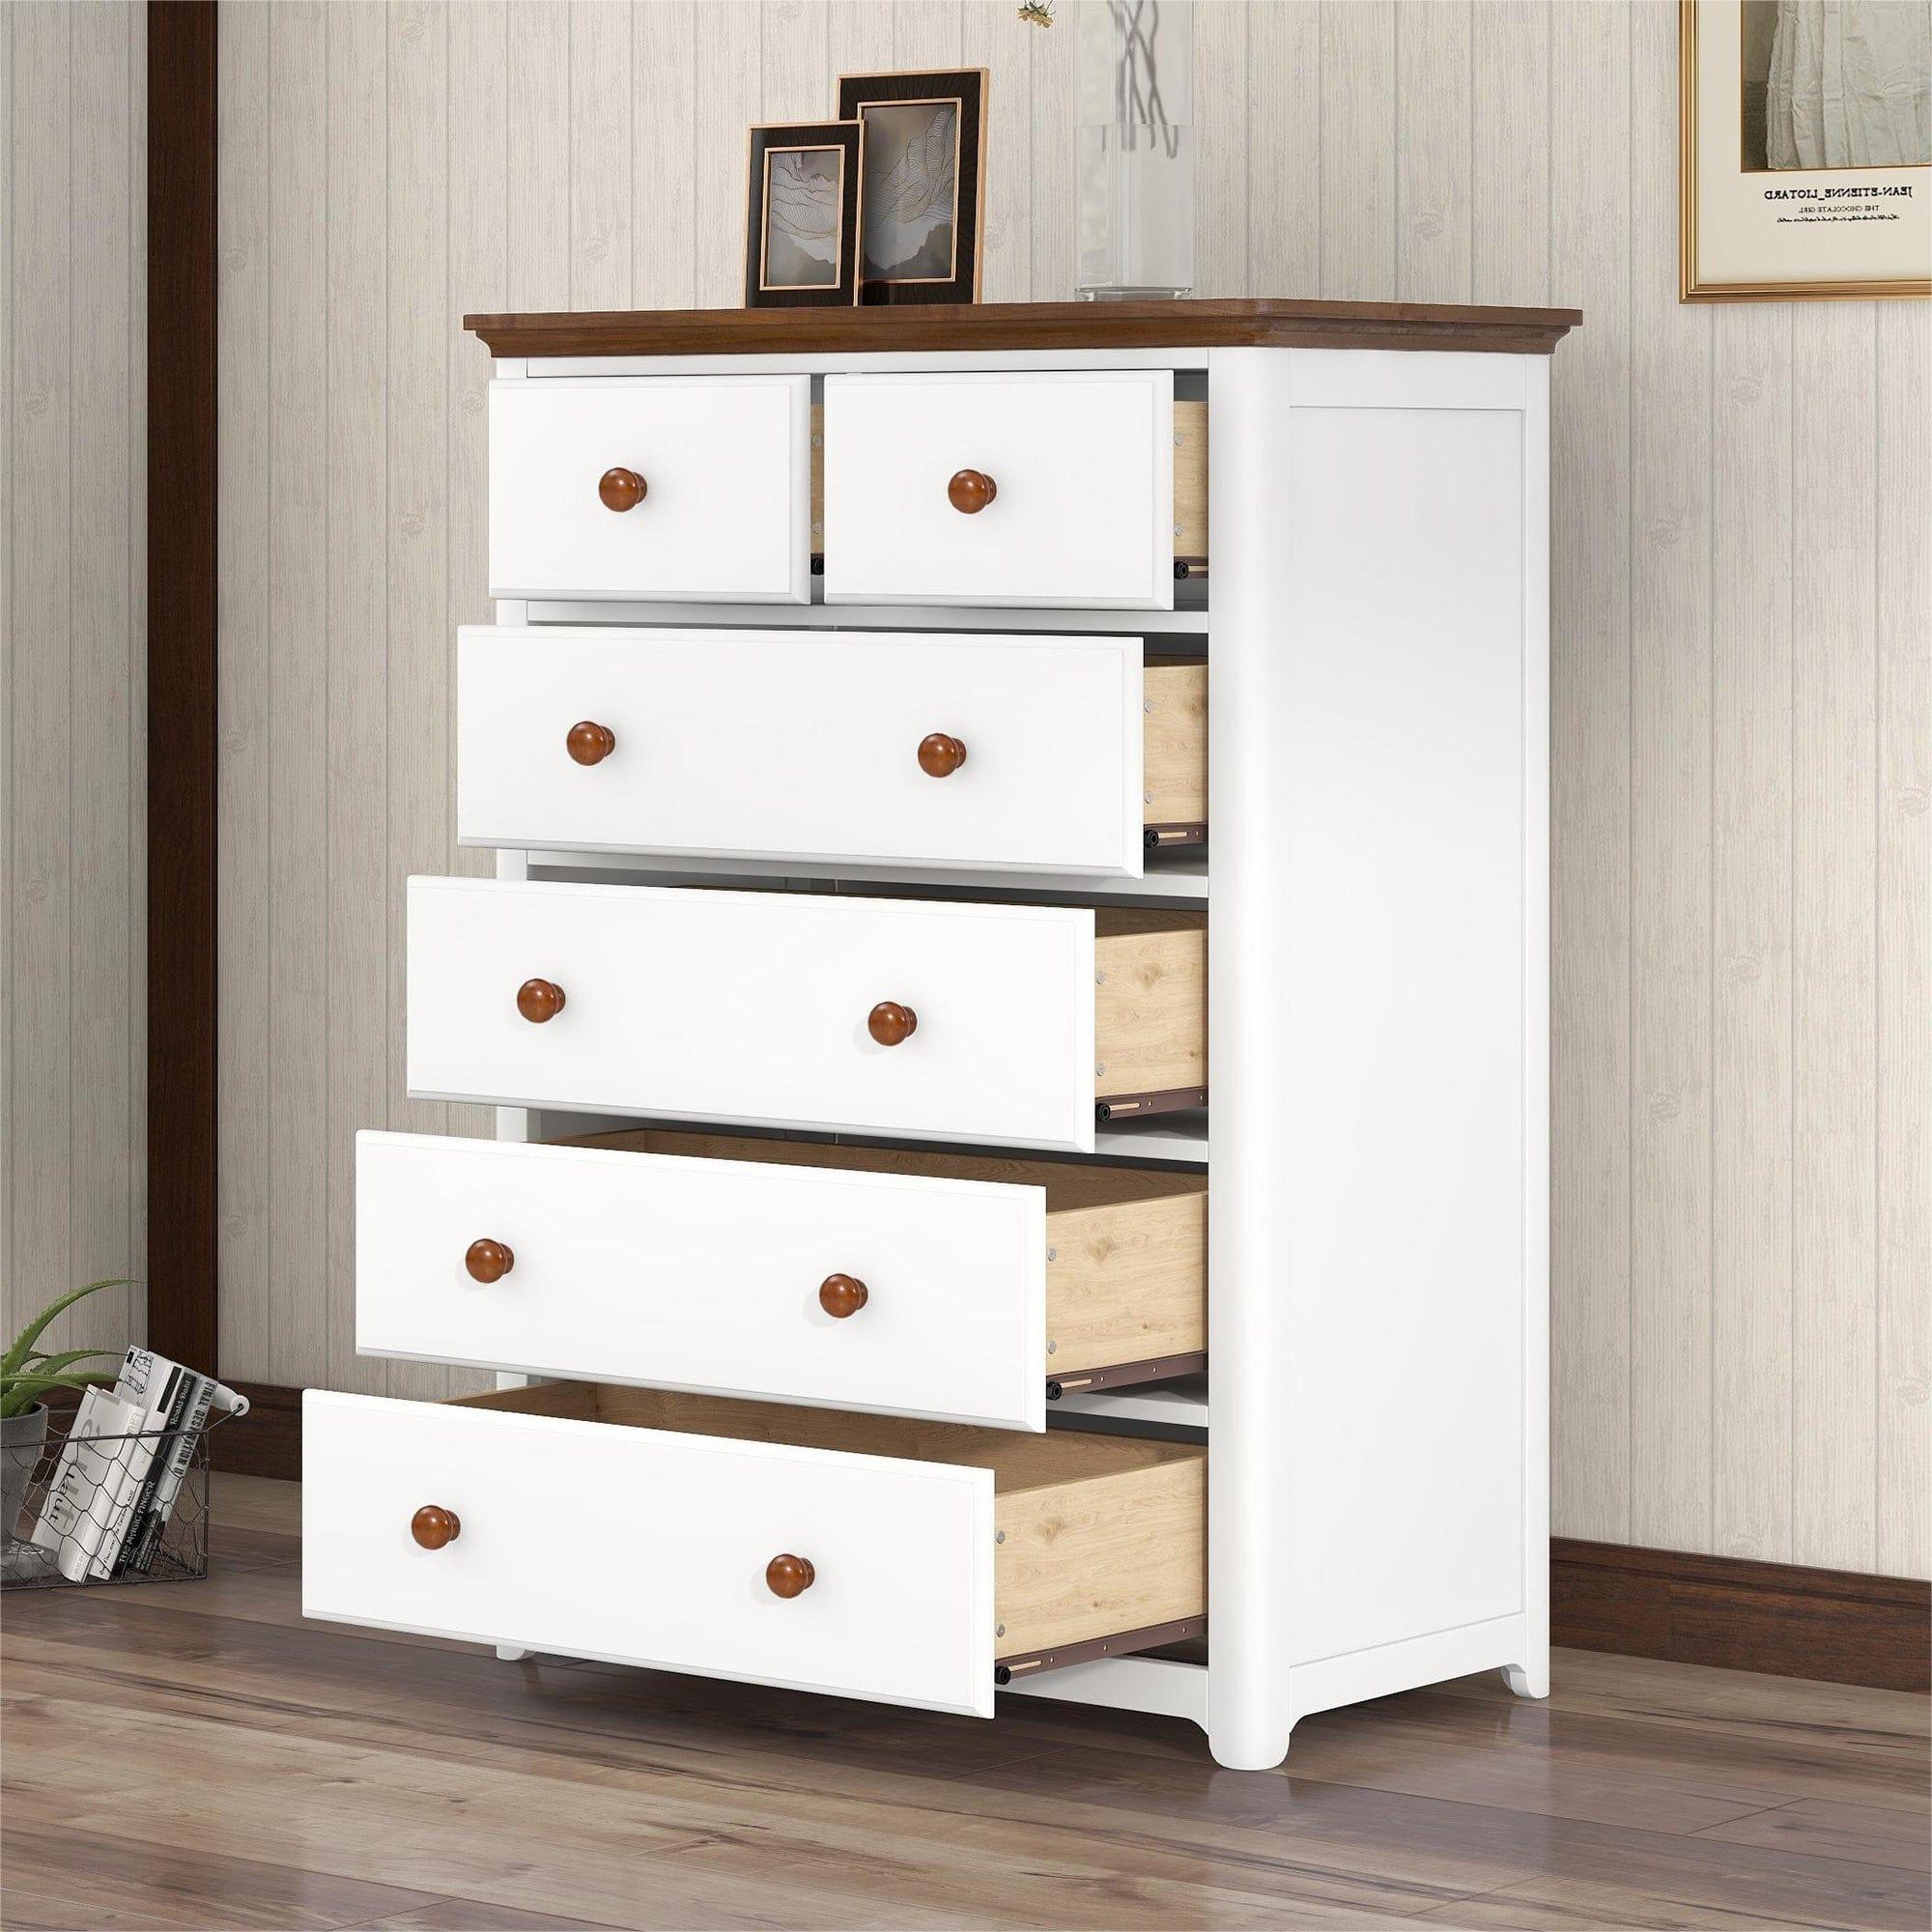 Shop Rustic Wooden Chest with 6 Drawers,Storage Cabinet for Bedroom,White+Walnut Mademoiselle Home Decor